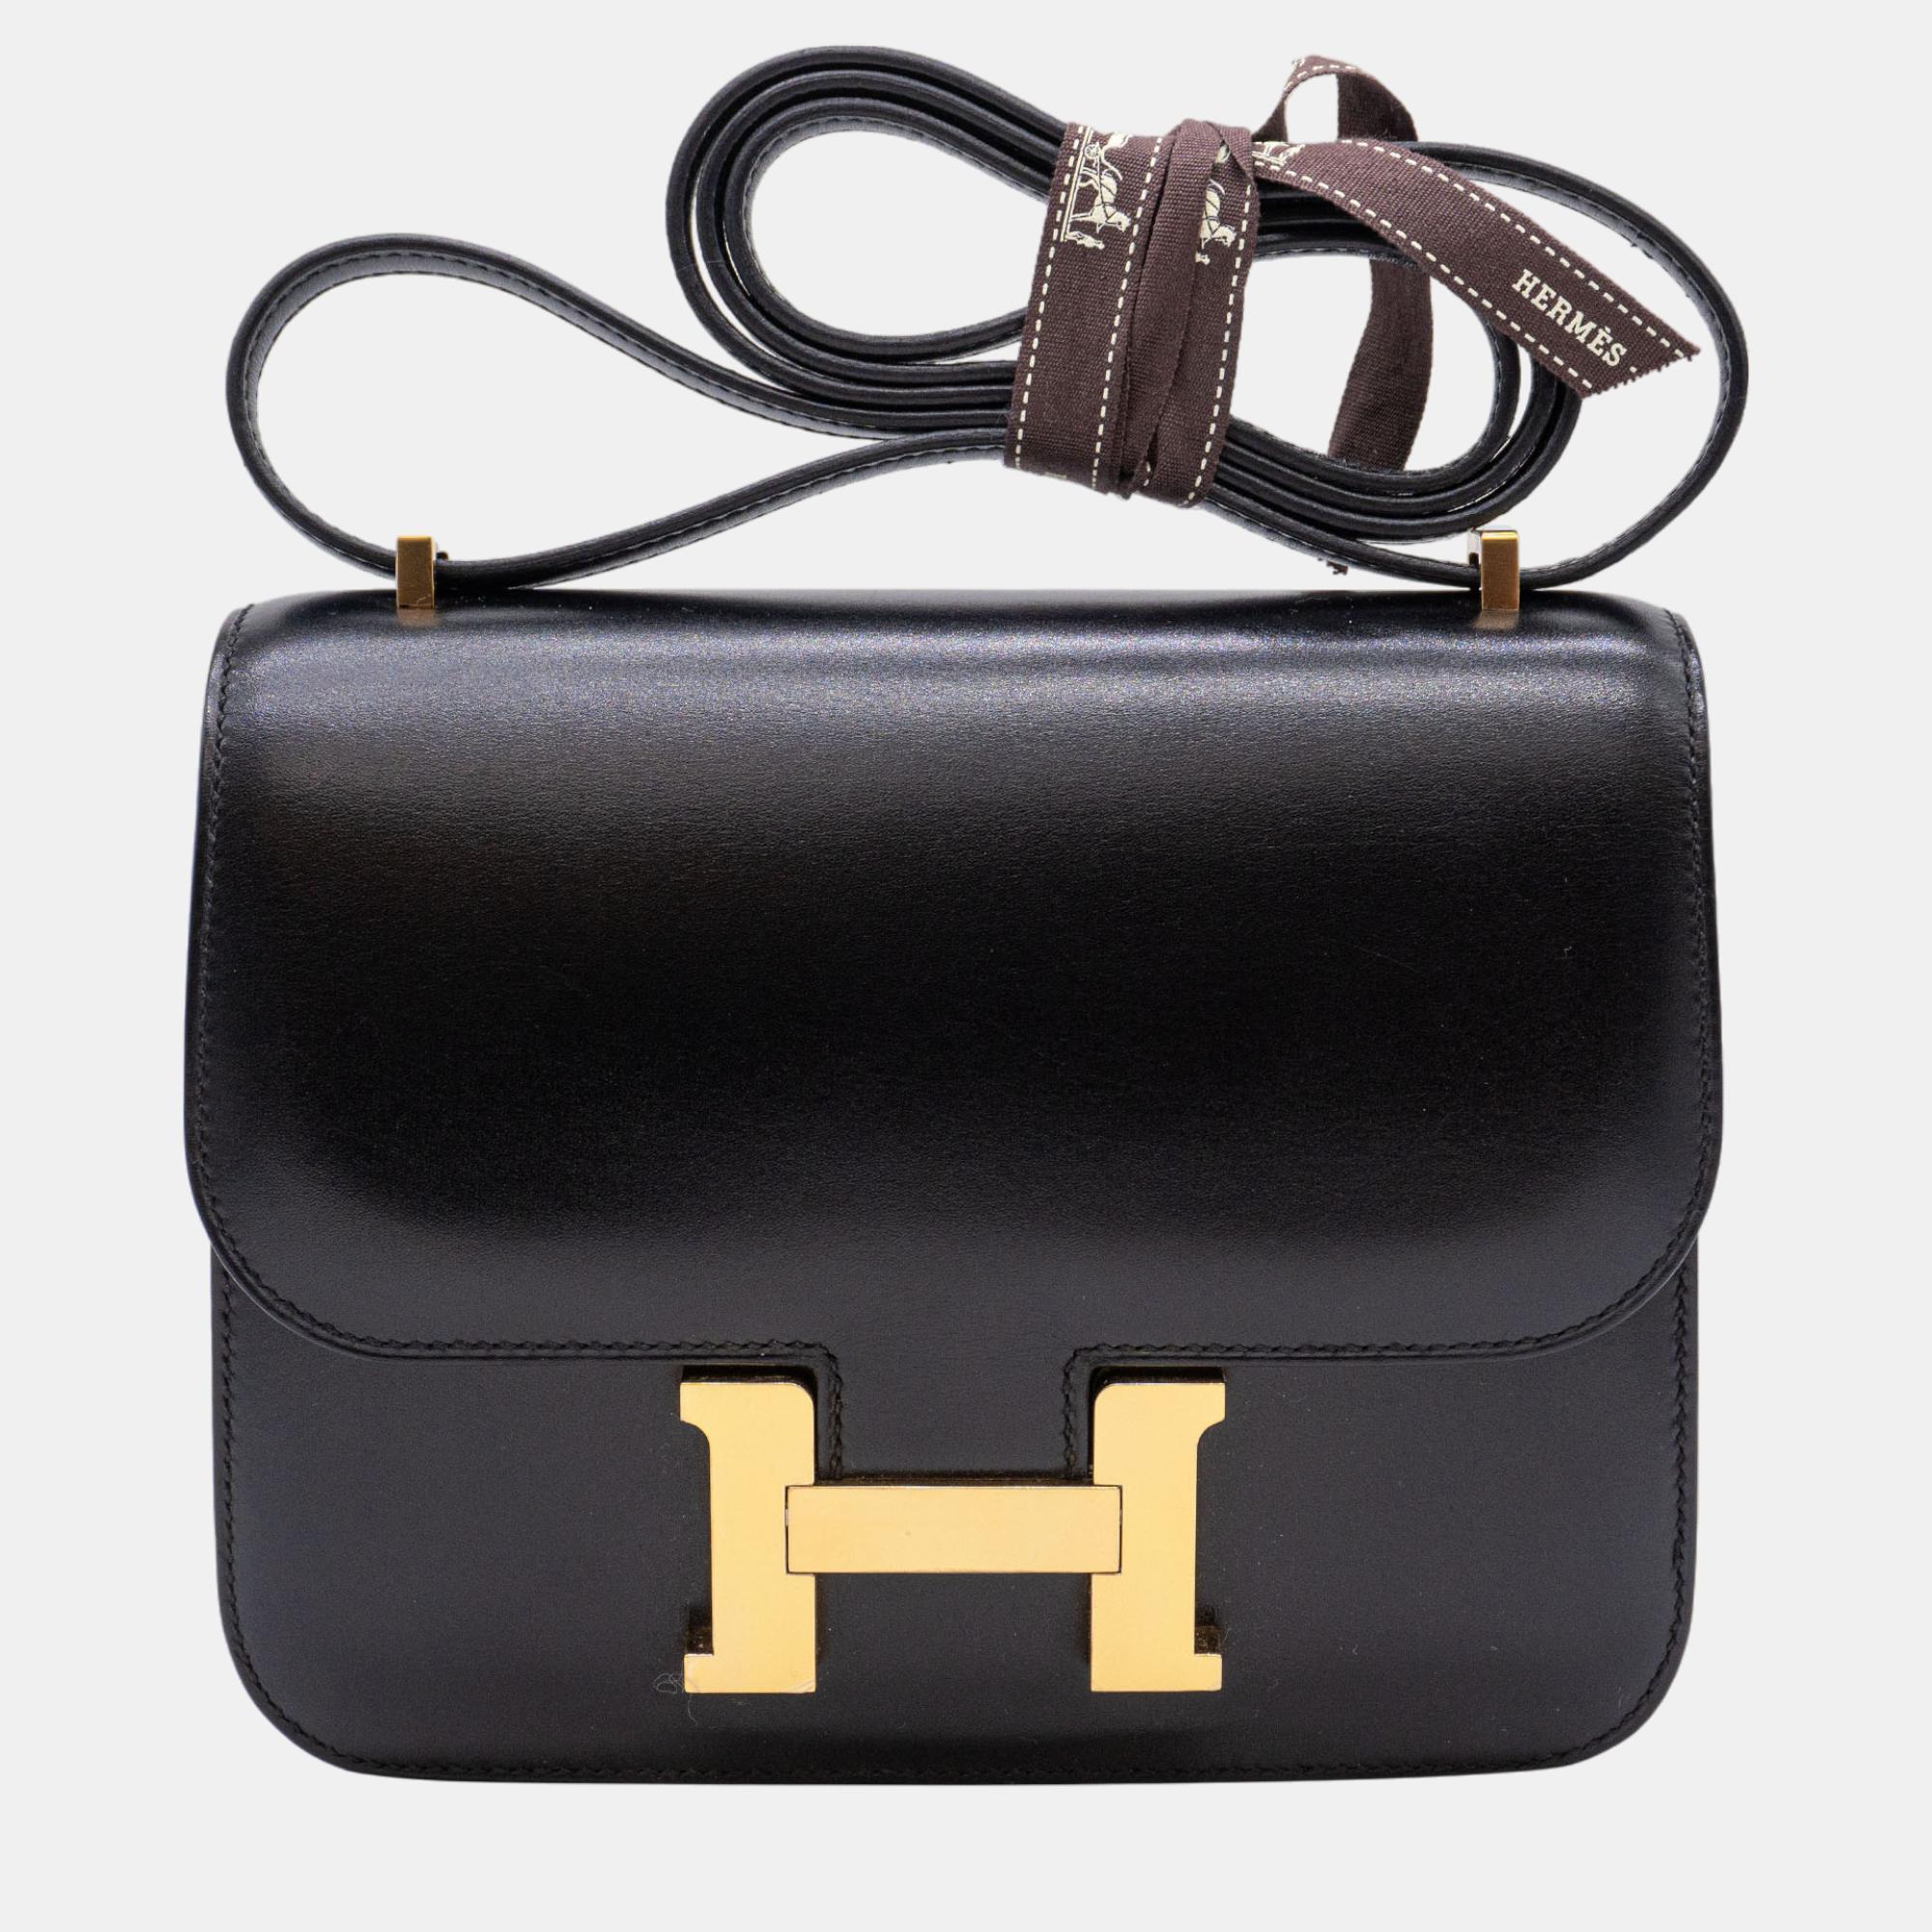 Indulge in timeless luxury with this Hermes bag. Meticulously crafted this iconic piece combines heritage elegance and craftsmanship elevating your style to a level of unmatched sophistication.